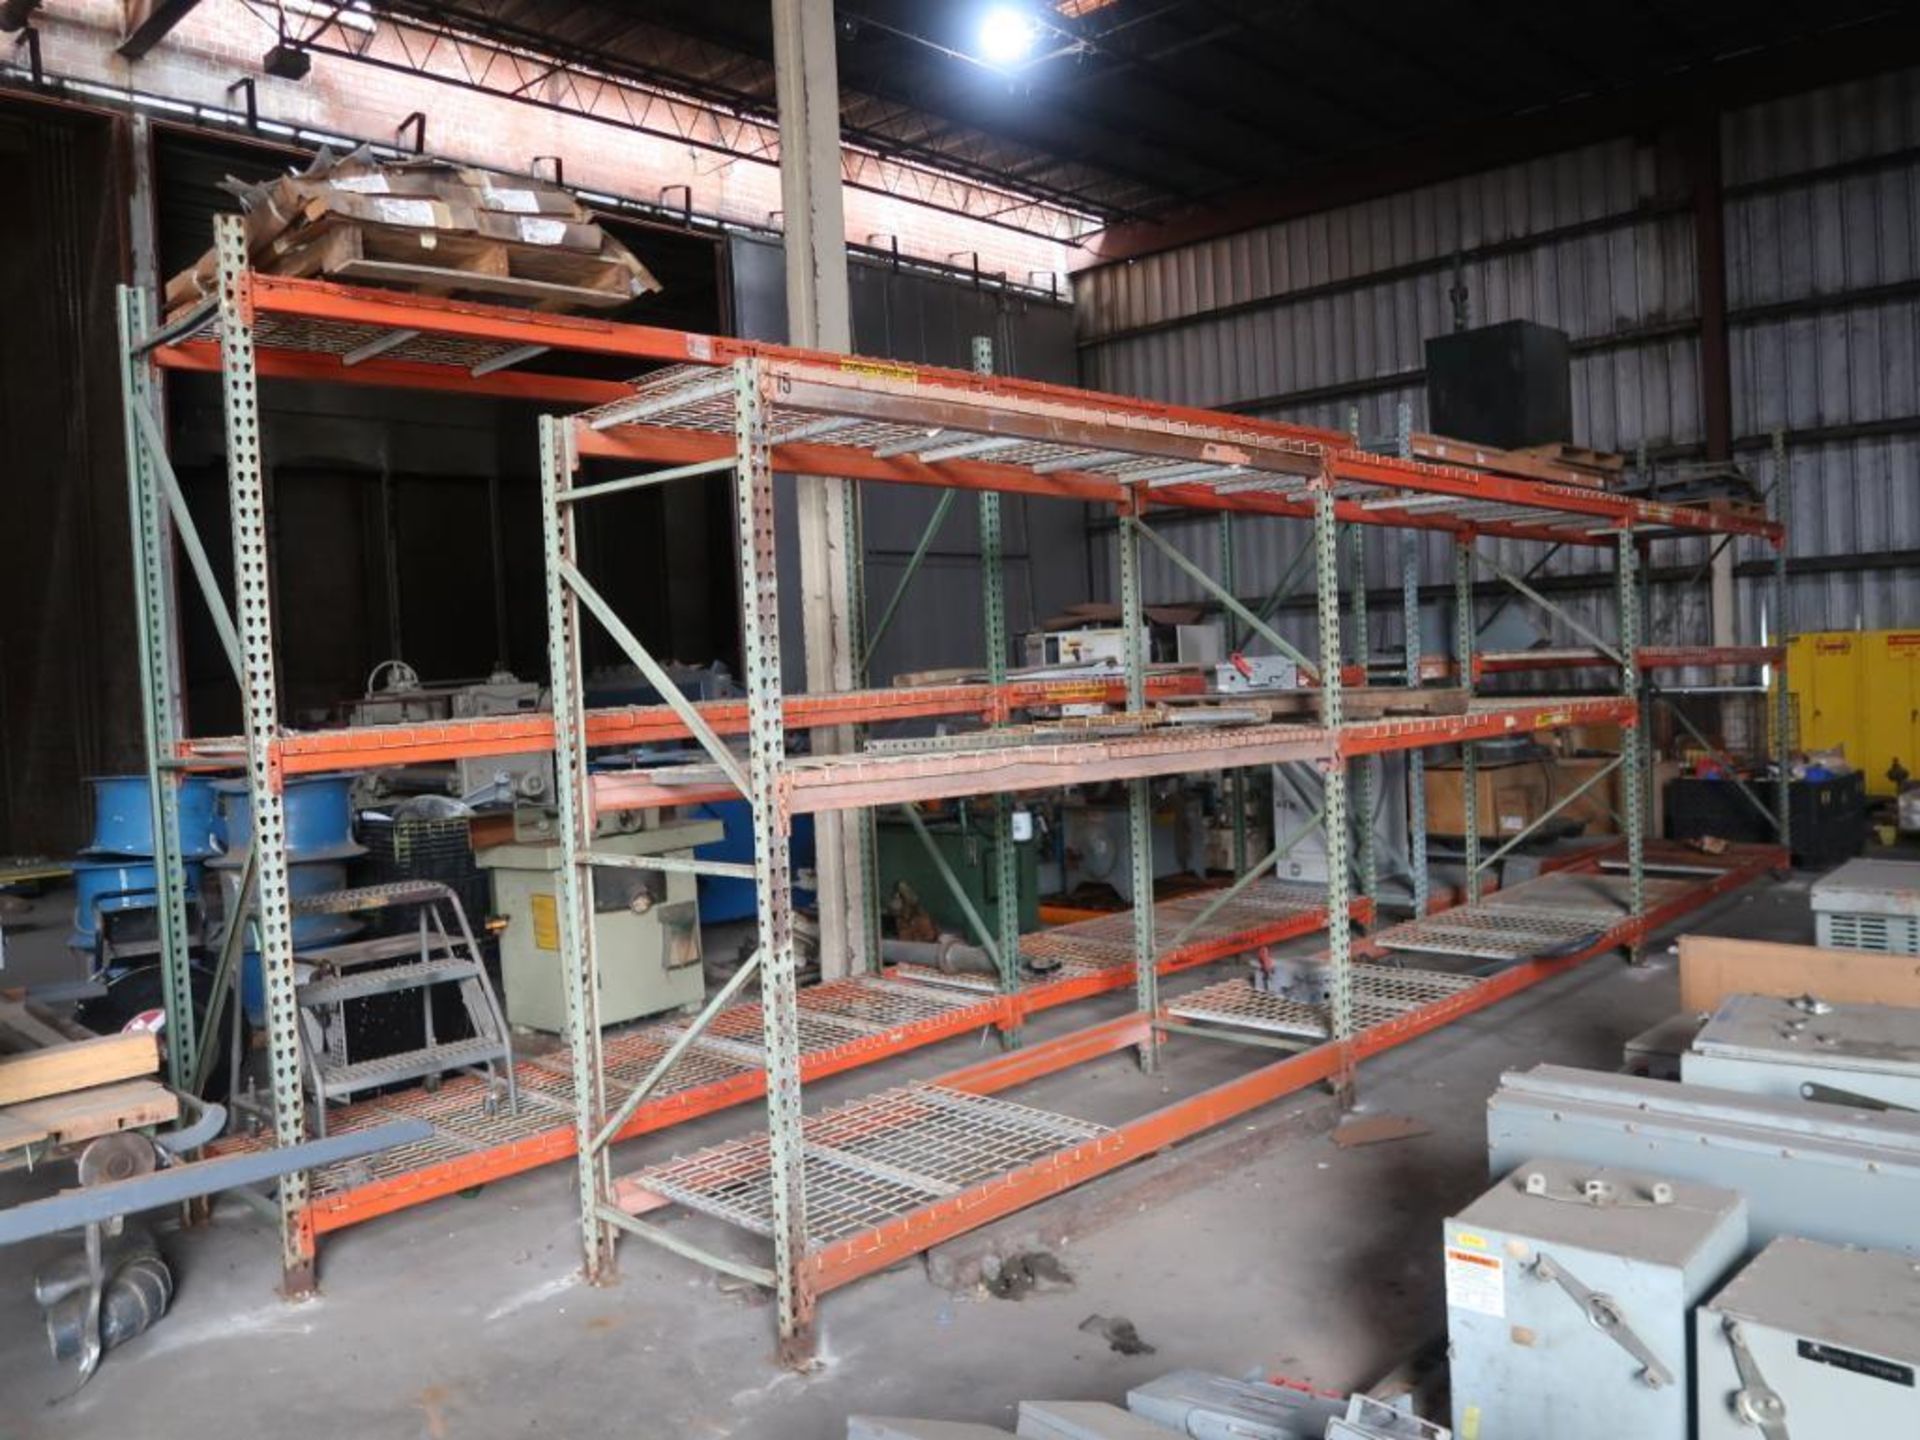 LOT: (3) Sections 36 in. x 96 in. x 8 ft. Pallet Rack, (2) Sections 36 in. x 112 in. x 10 ft. Pallet